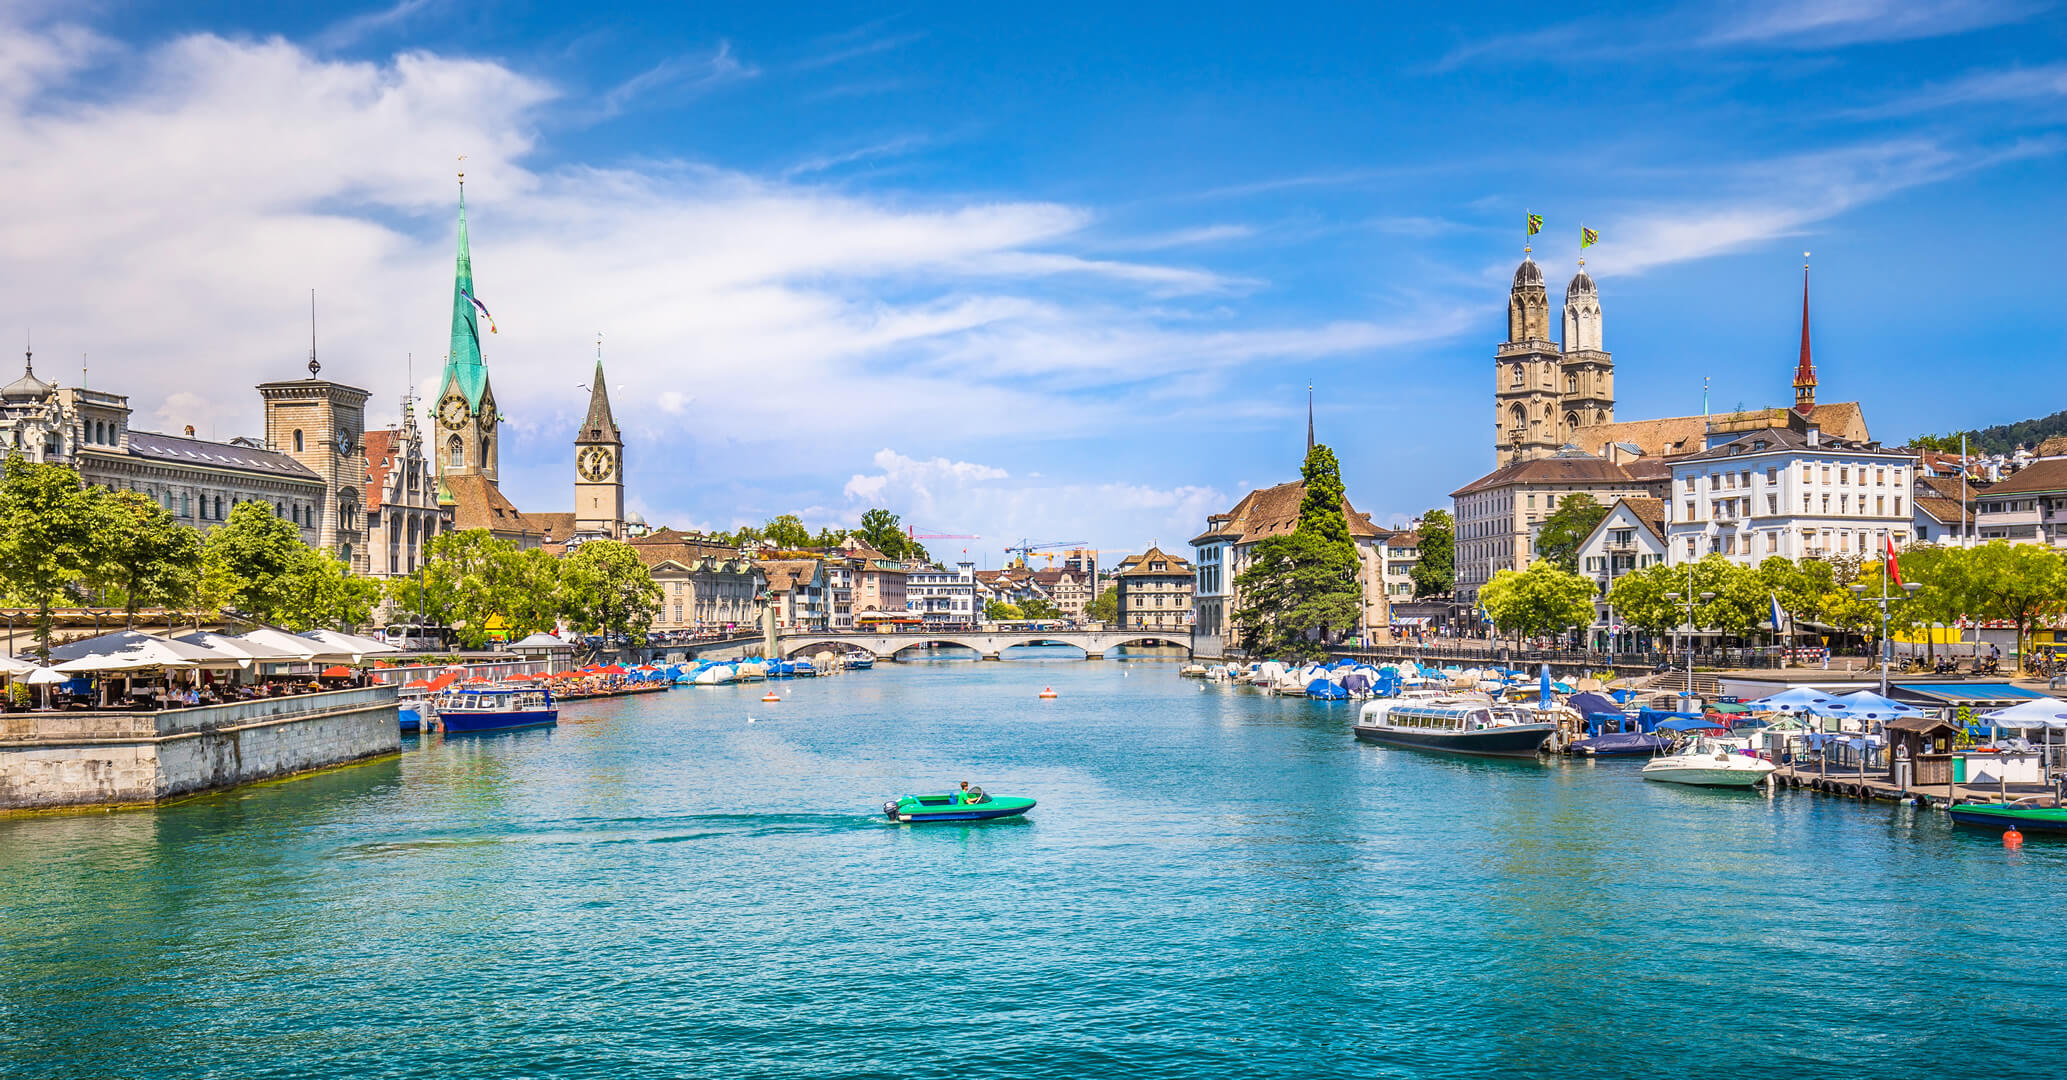 Panoramic view of historic Zurich city center